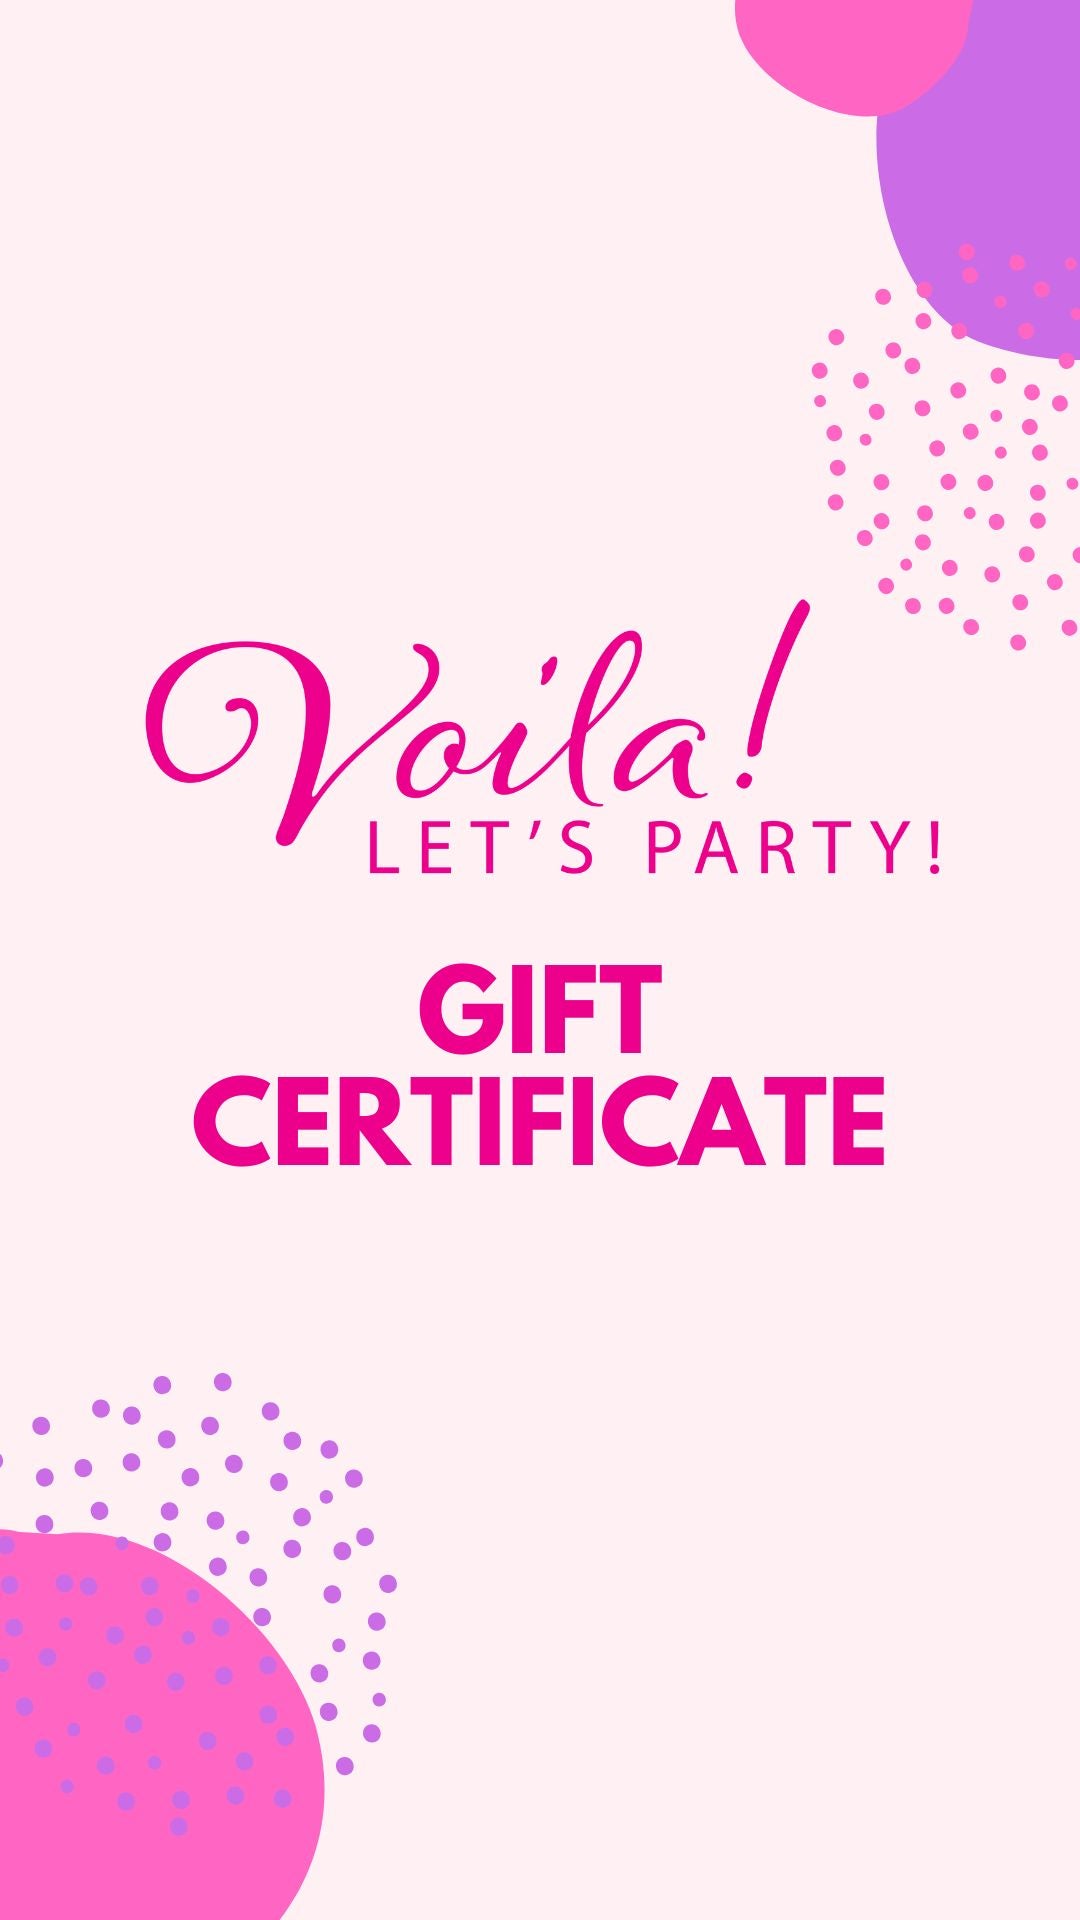 Voila! Let's Party! Gift Card